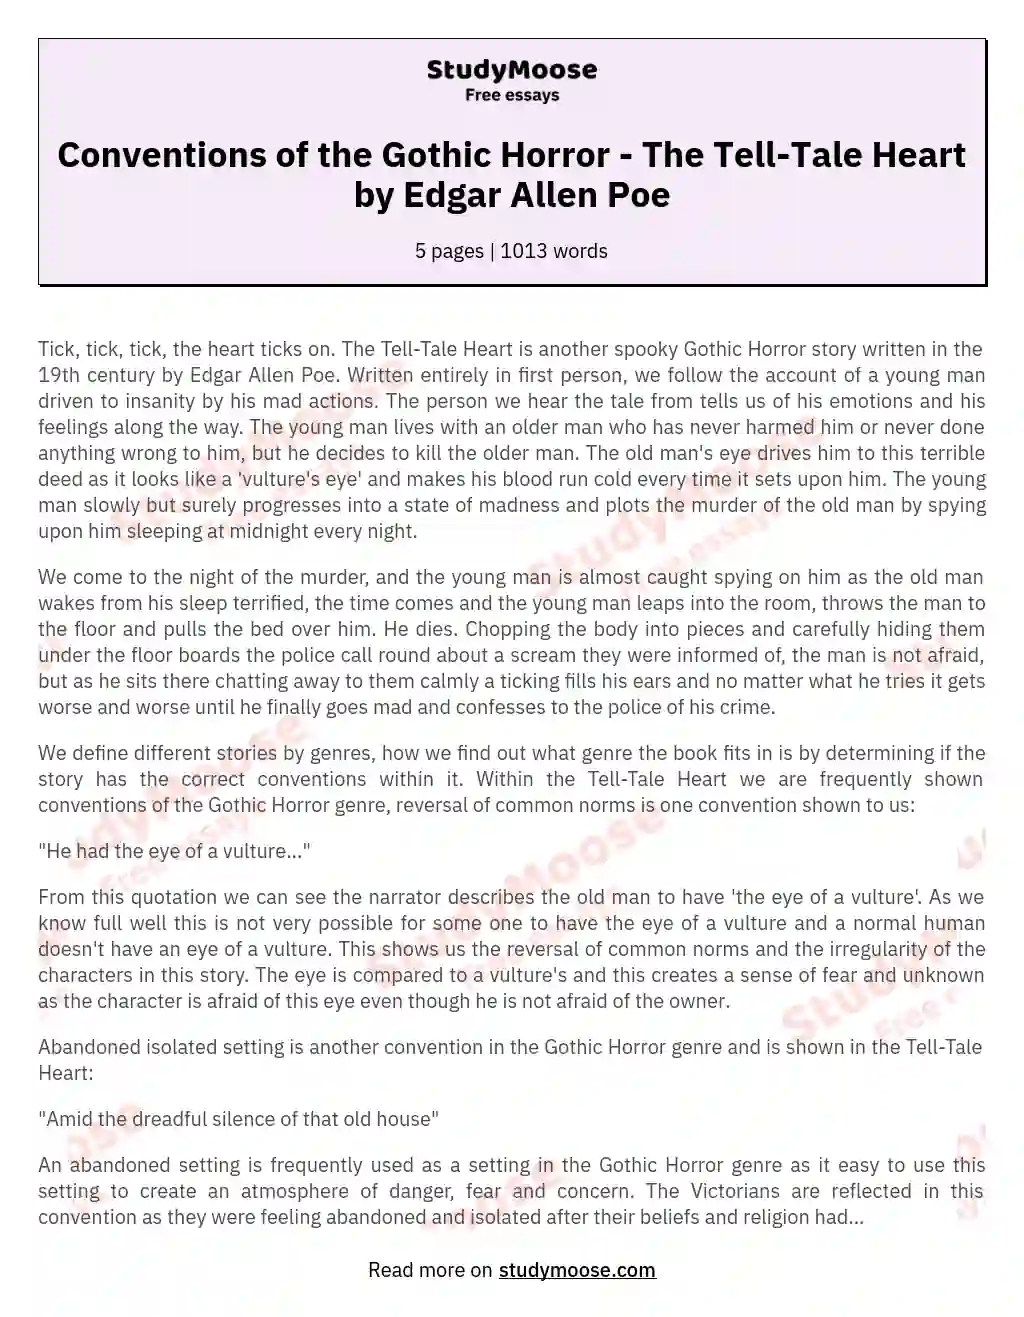 Conventions of the Gothic Horror - The Tell-Tale Heart by Edgar Allen Poe